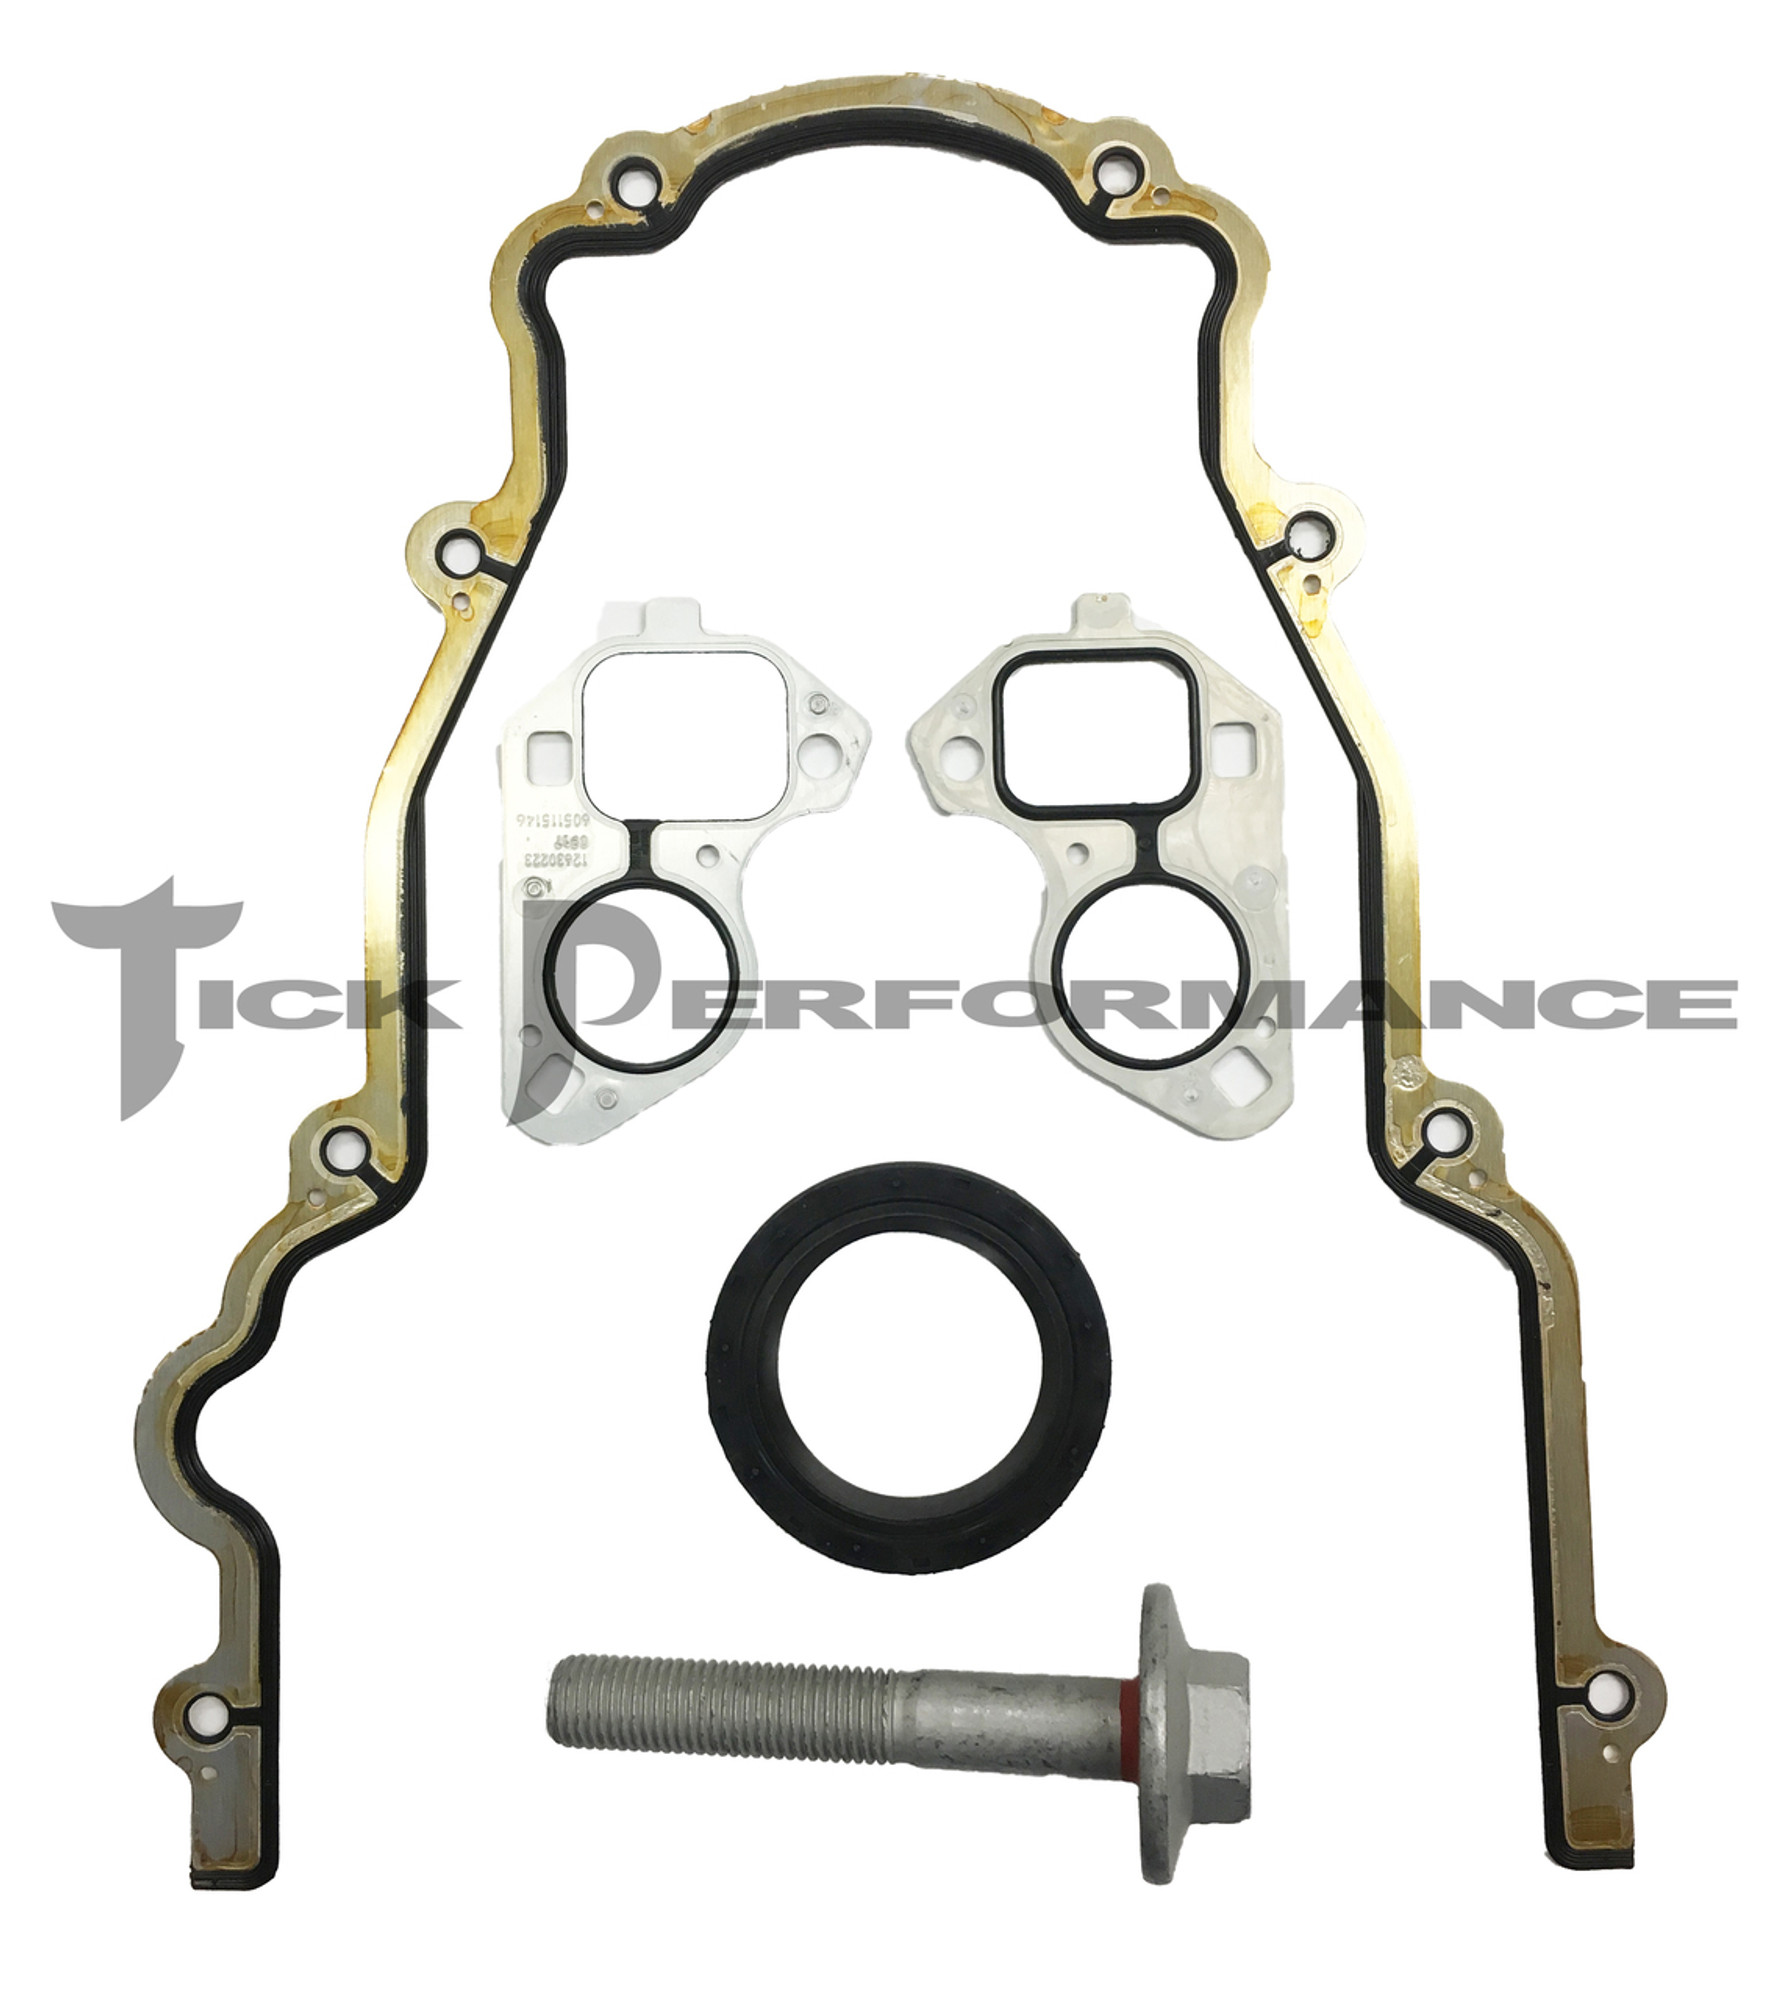 Tick Perf Cam-Swap Gasket & Bolt Kit for GM LS-Series Engines